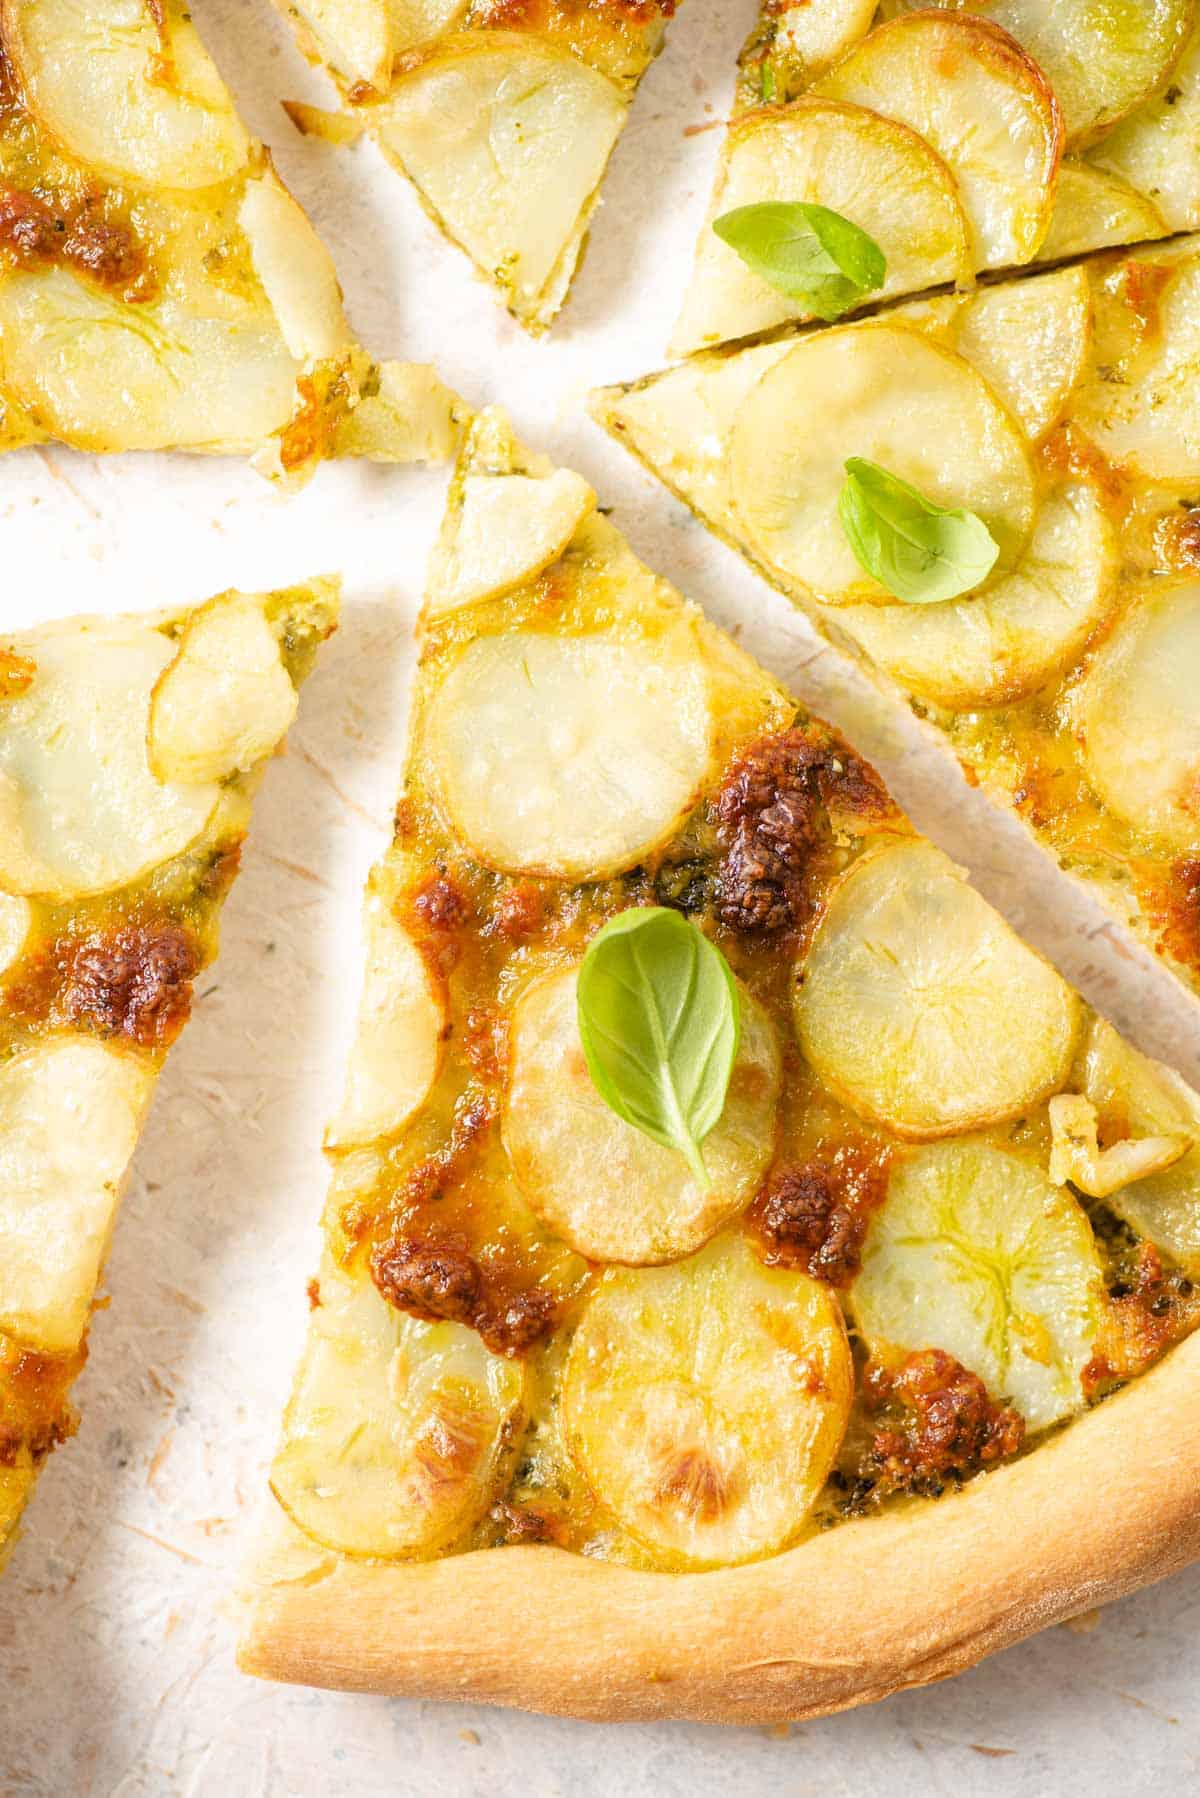 A close up of a slice of pizza topped with potatoes